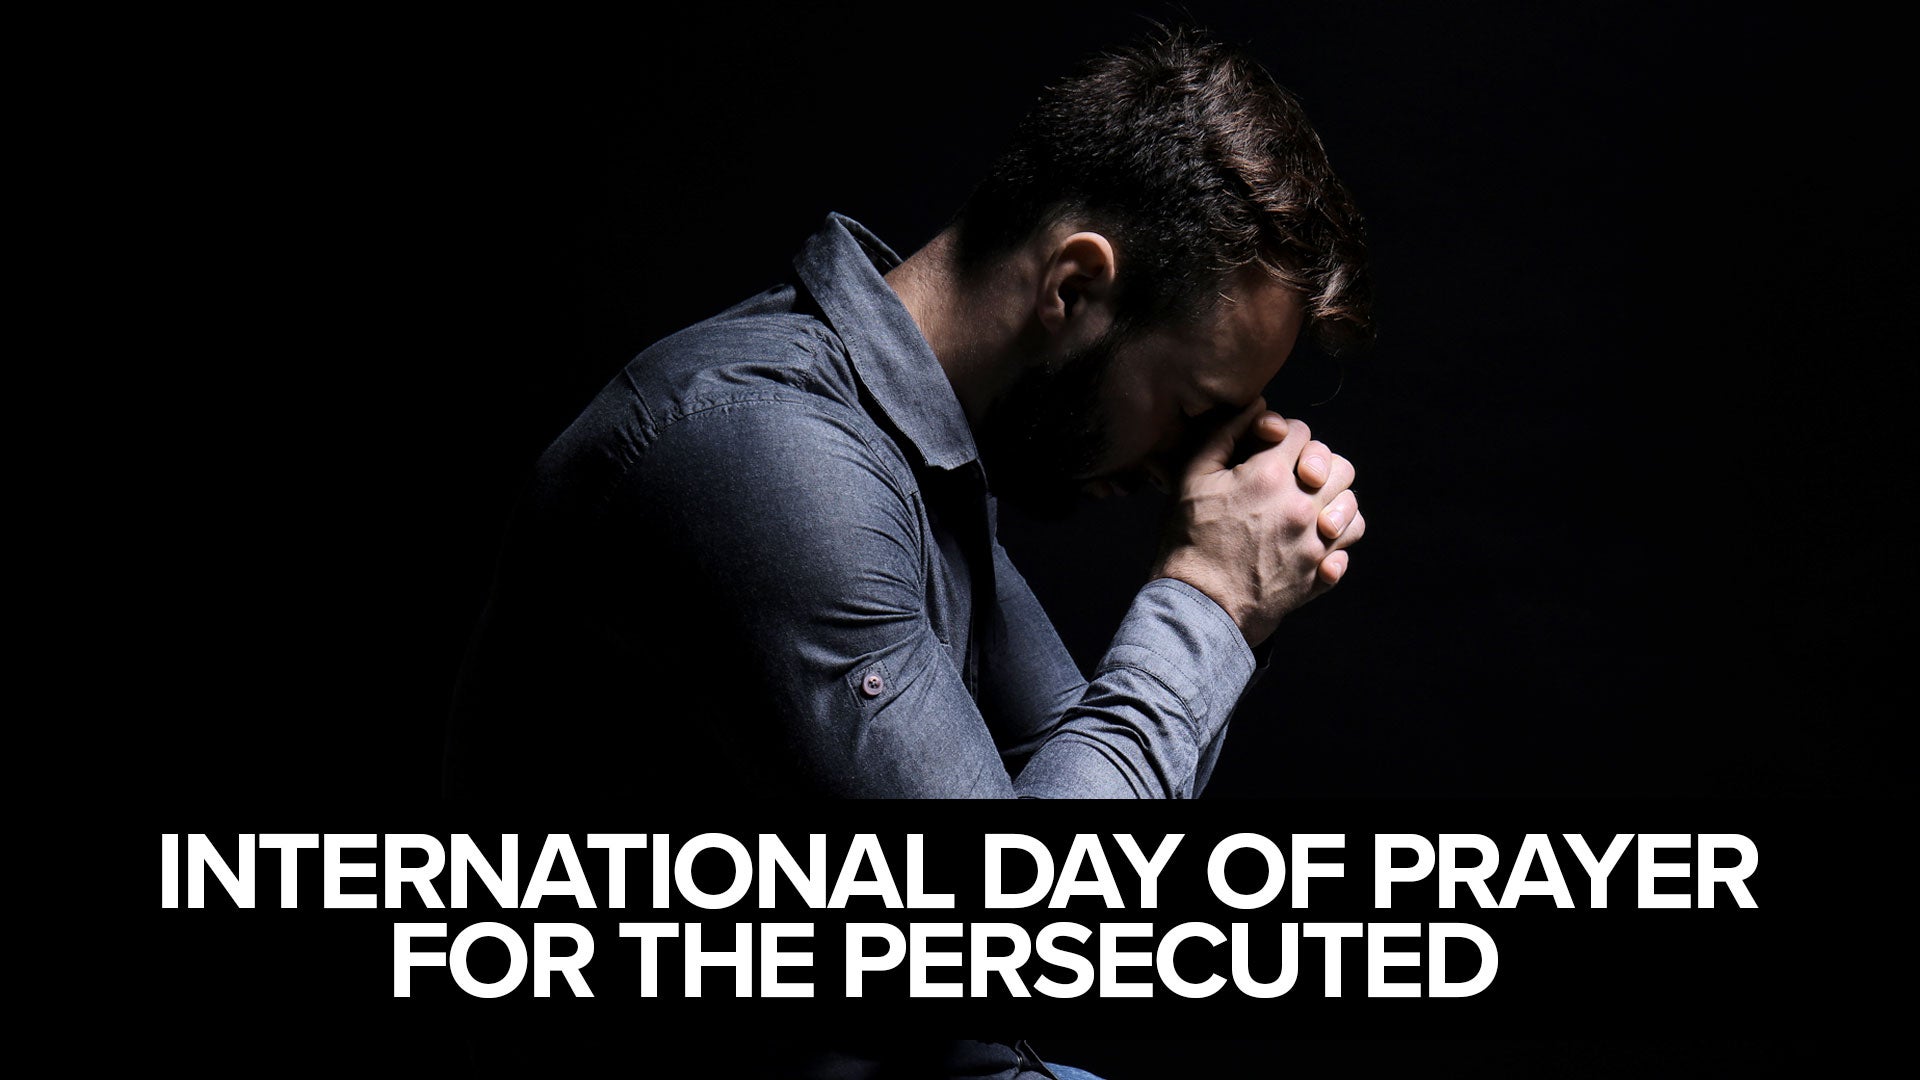 Join in the 'International Day of Prayer for the Persecuted' This